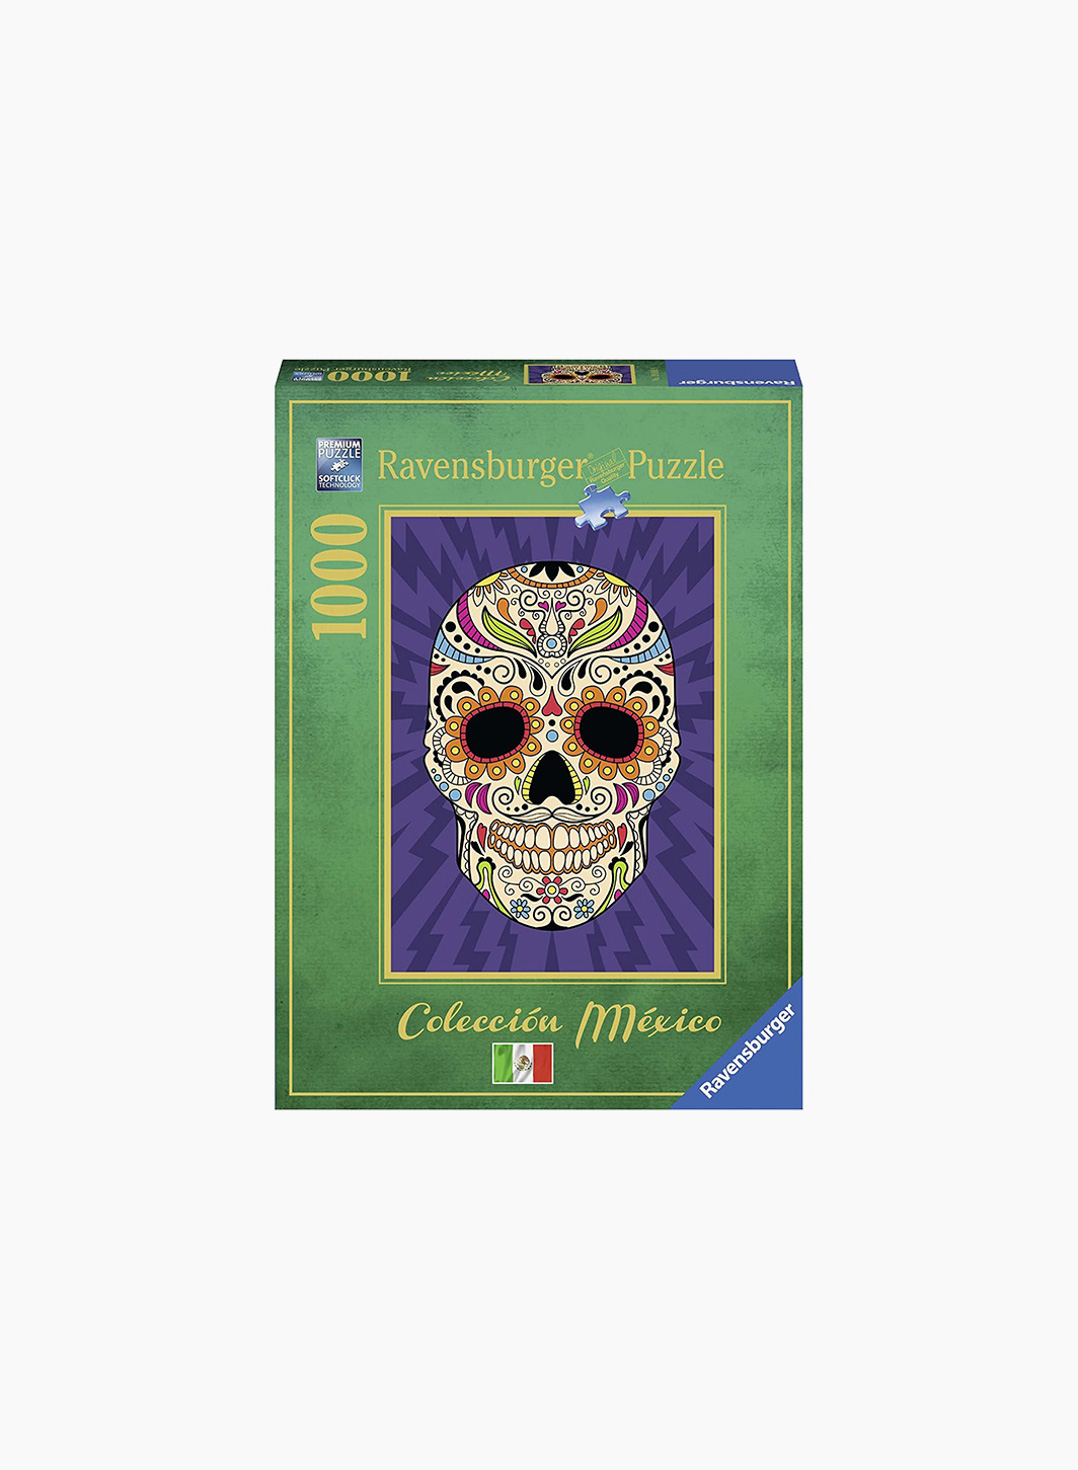 Ravensburger Puzzle Mexican Collection: Skull 1000p